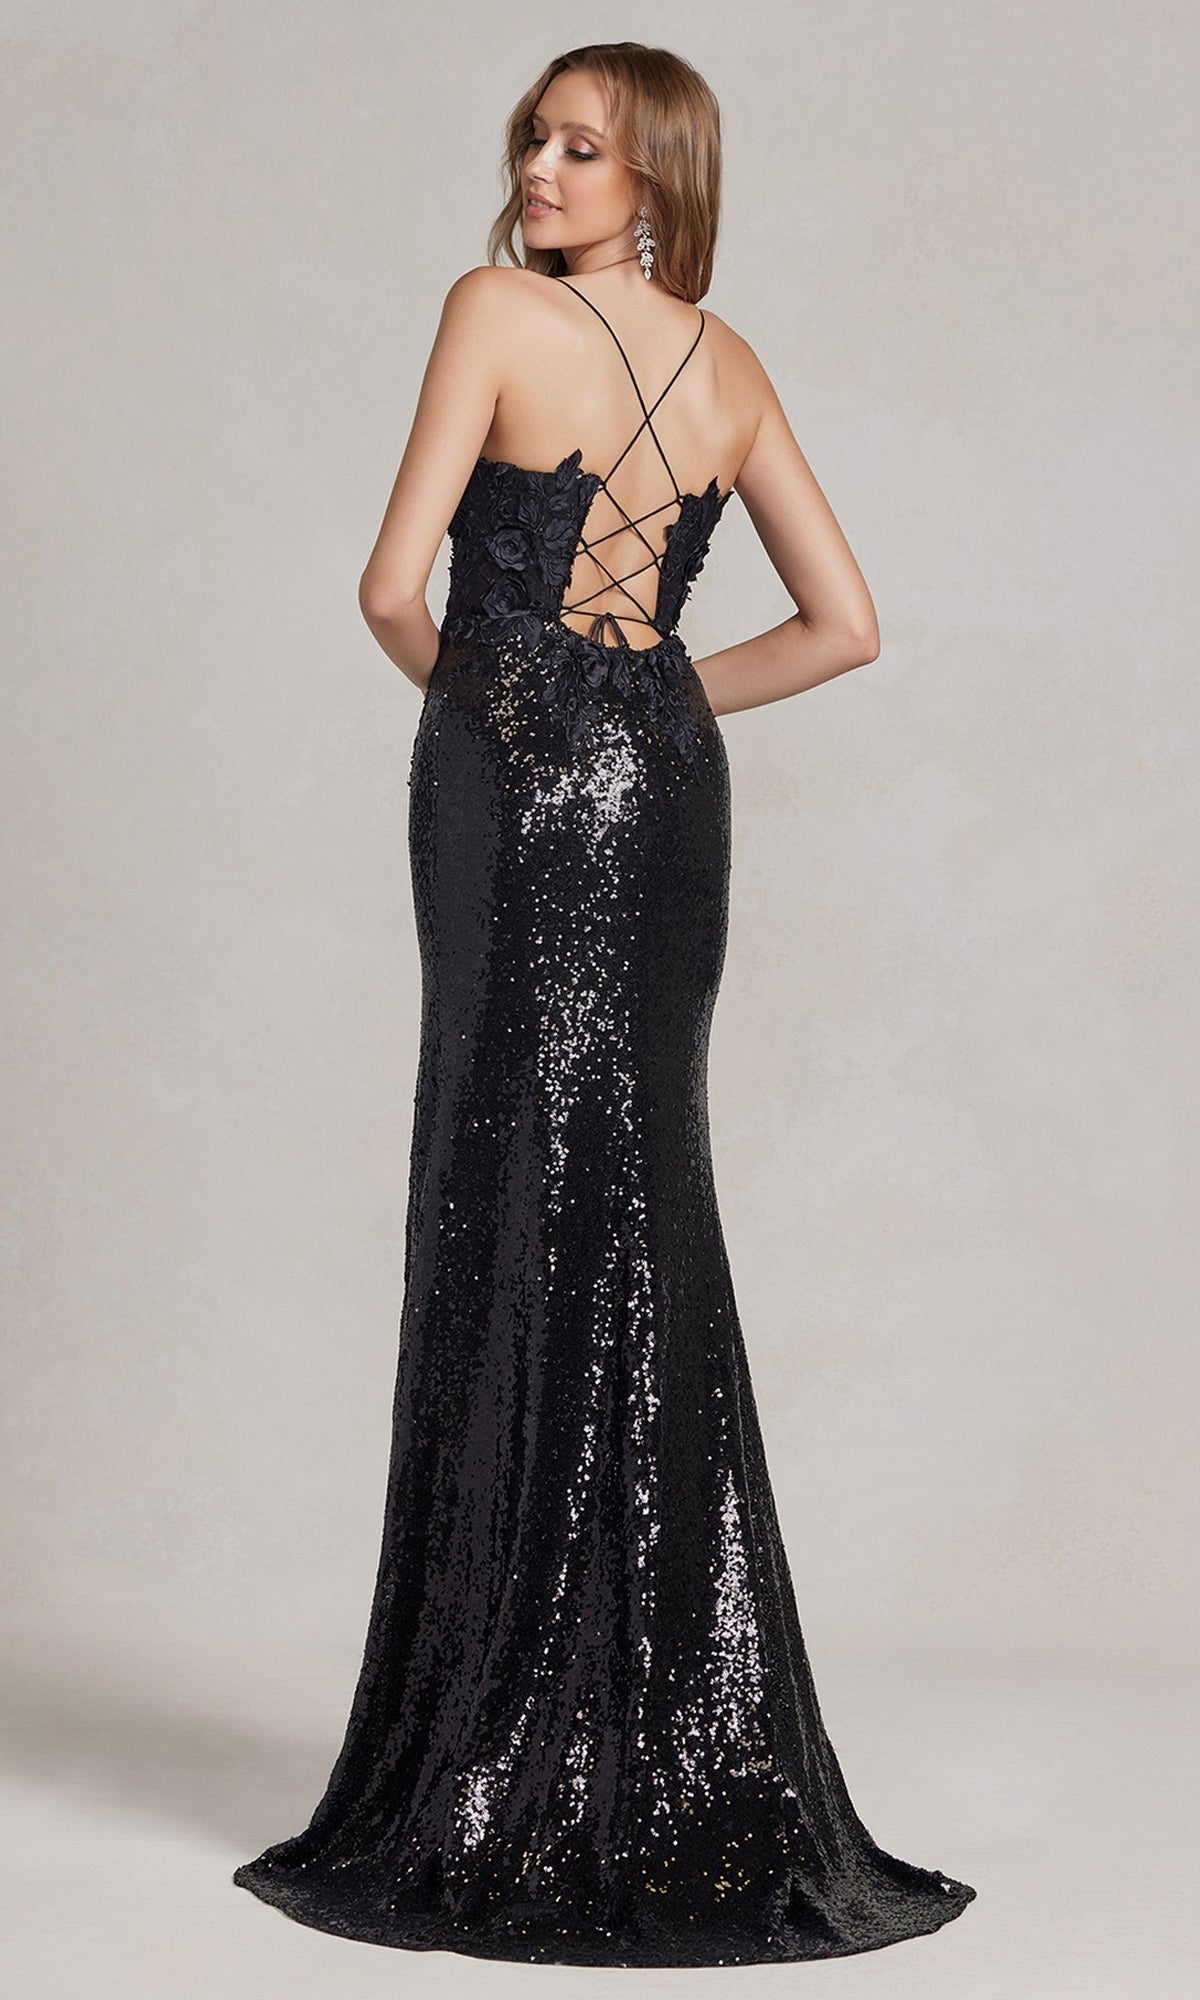  Long Sequin Prom Dress with 3D Floral Embroidery